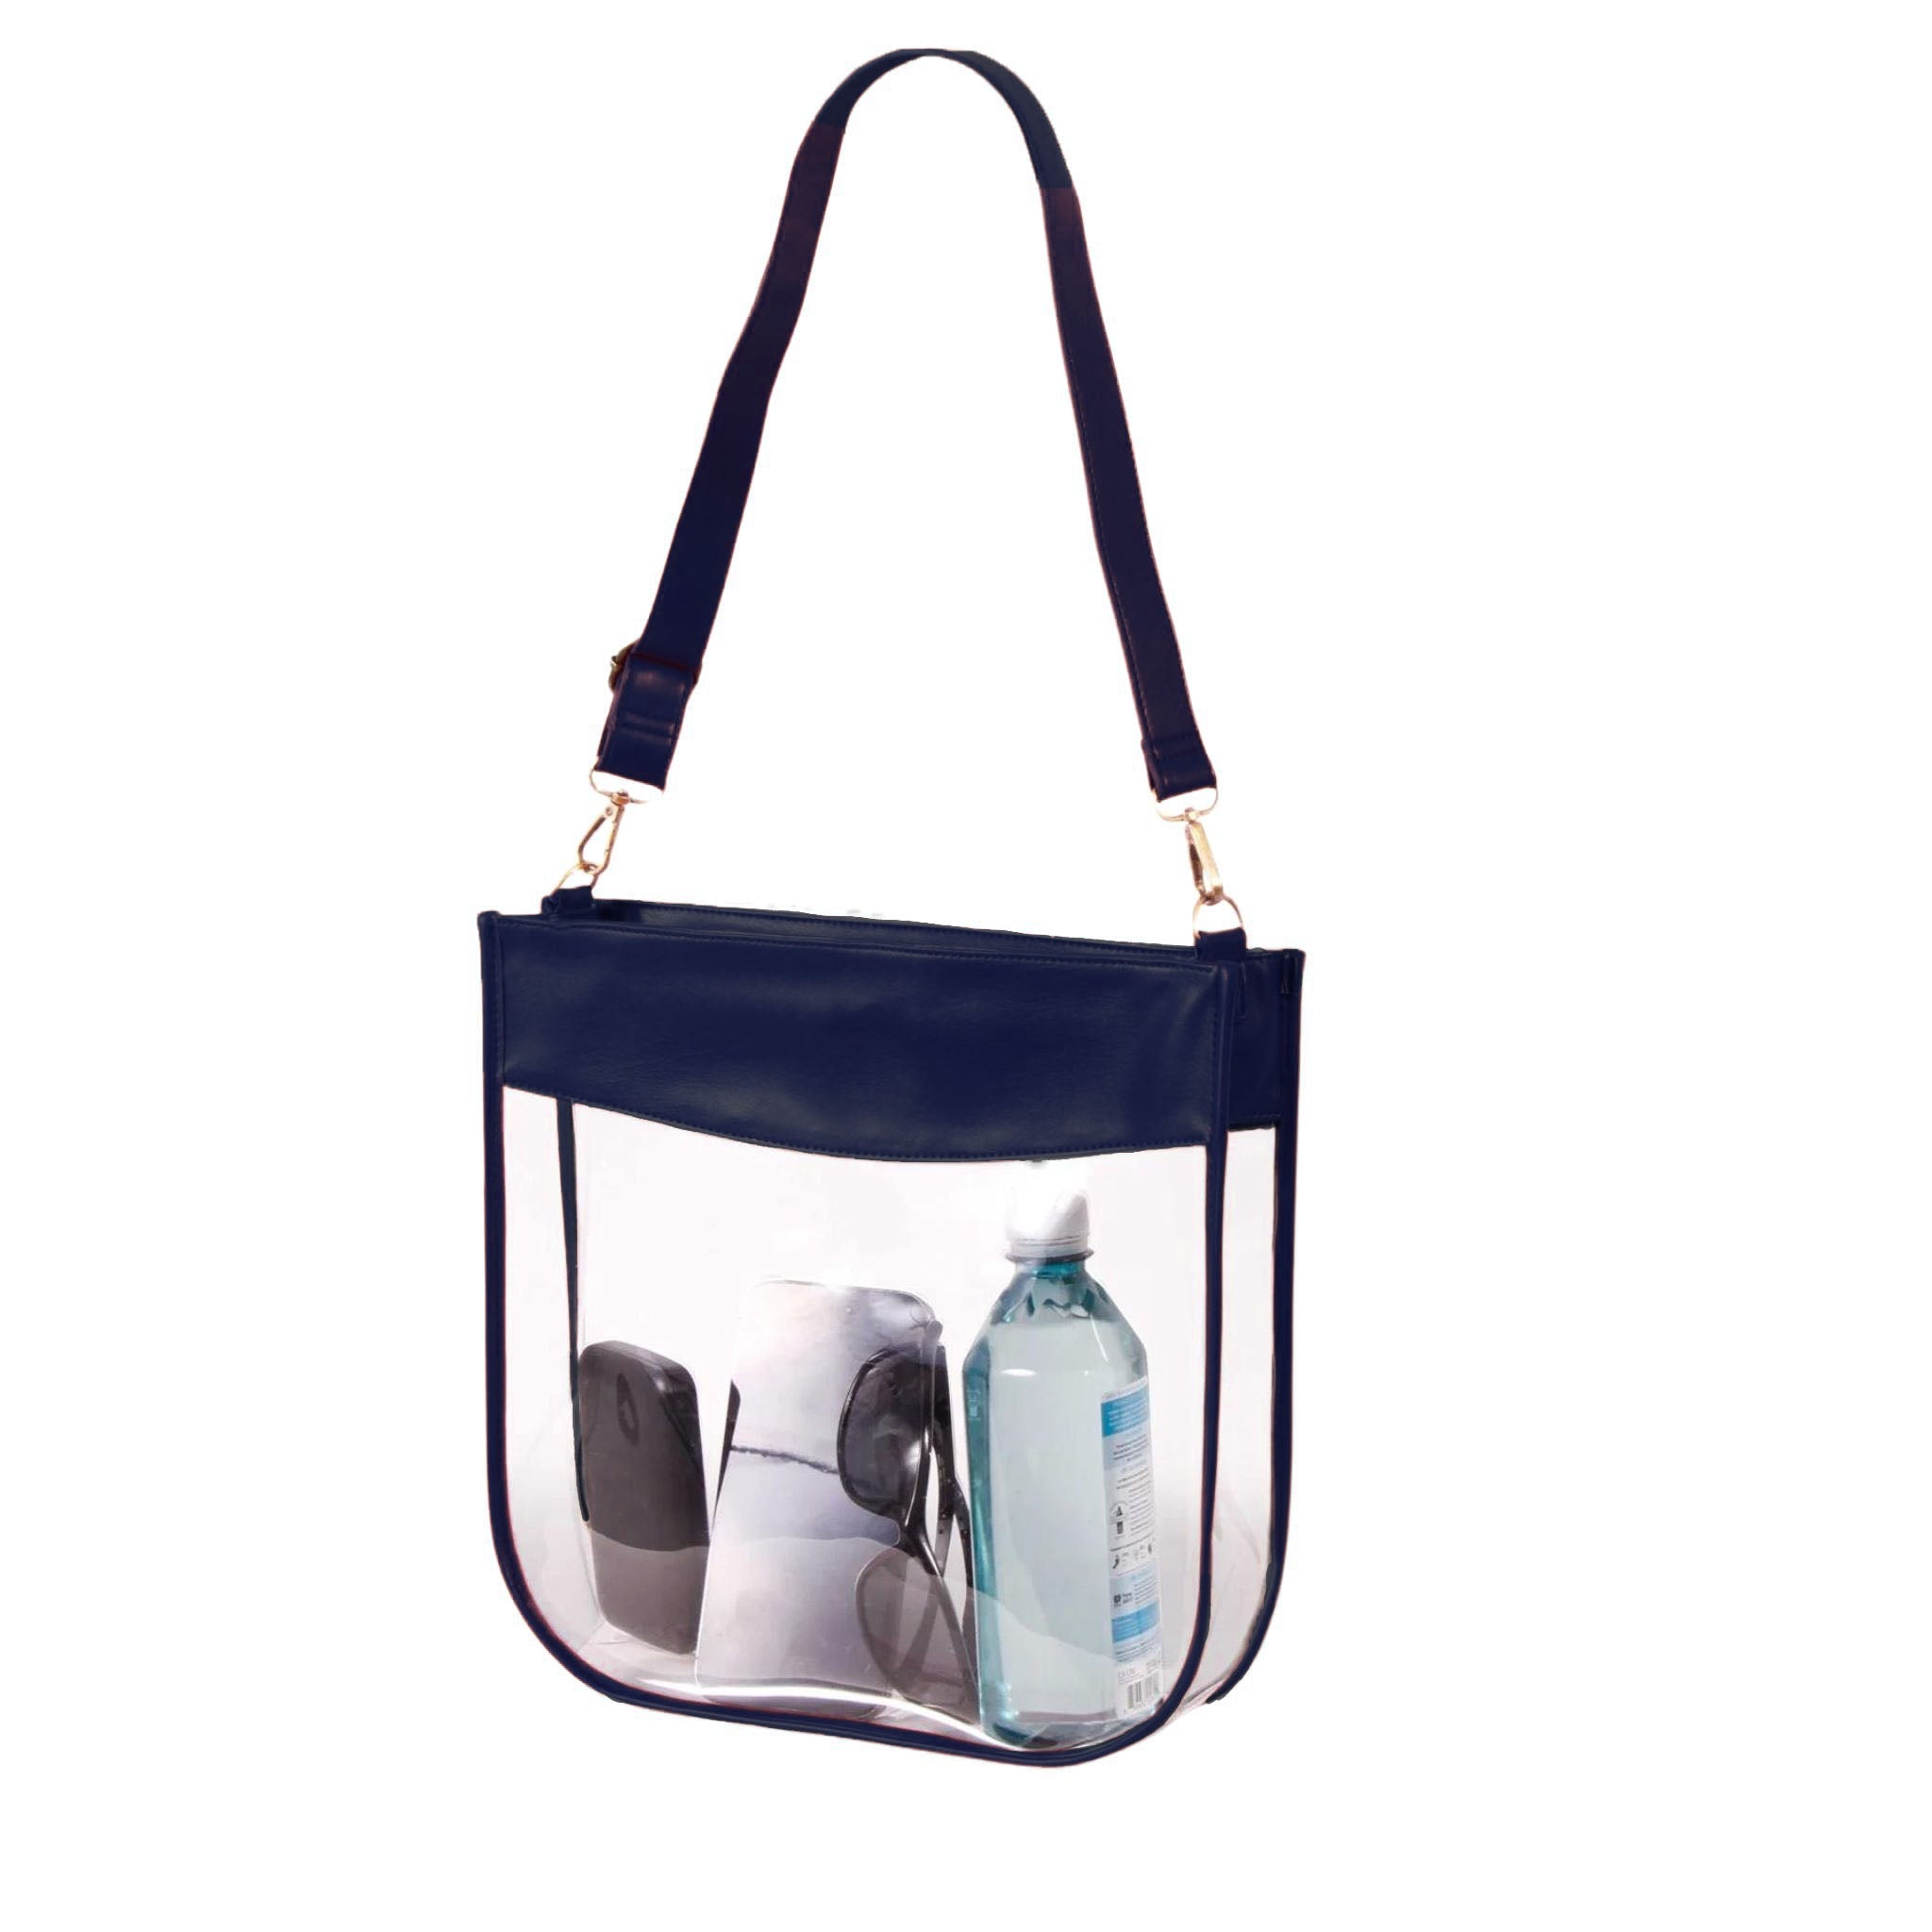 Stadium Approved Clear Messenger - Navy Trim